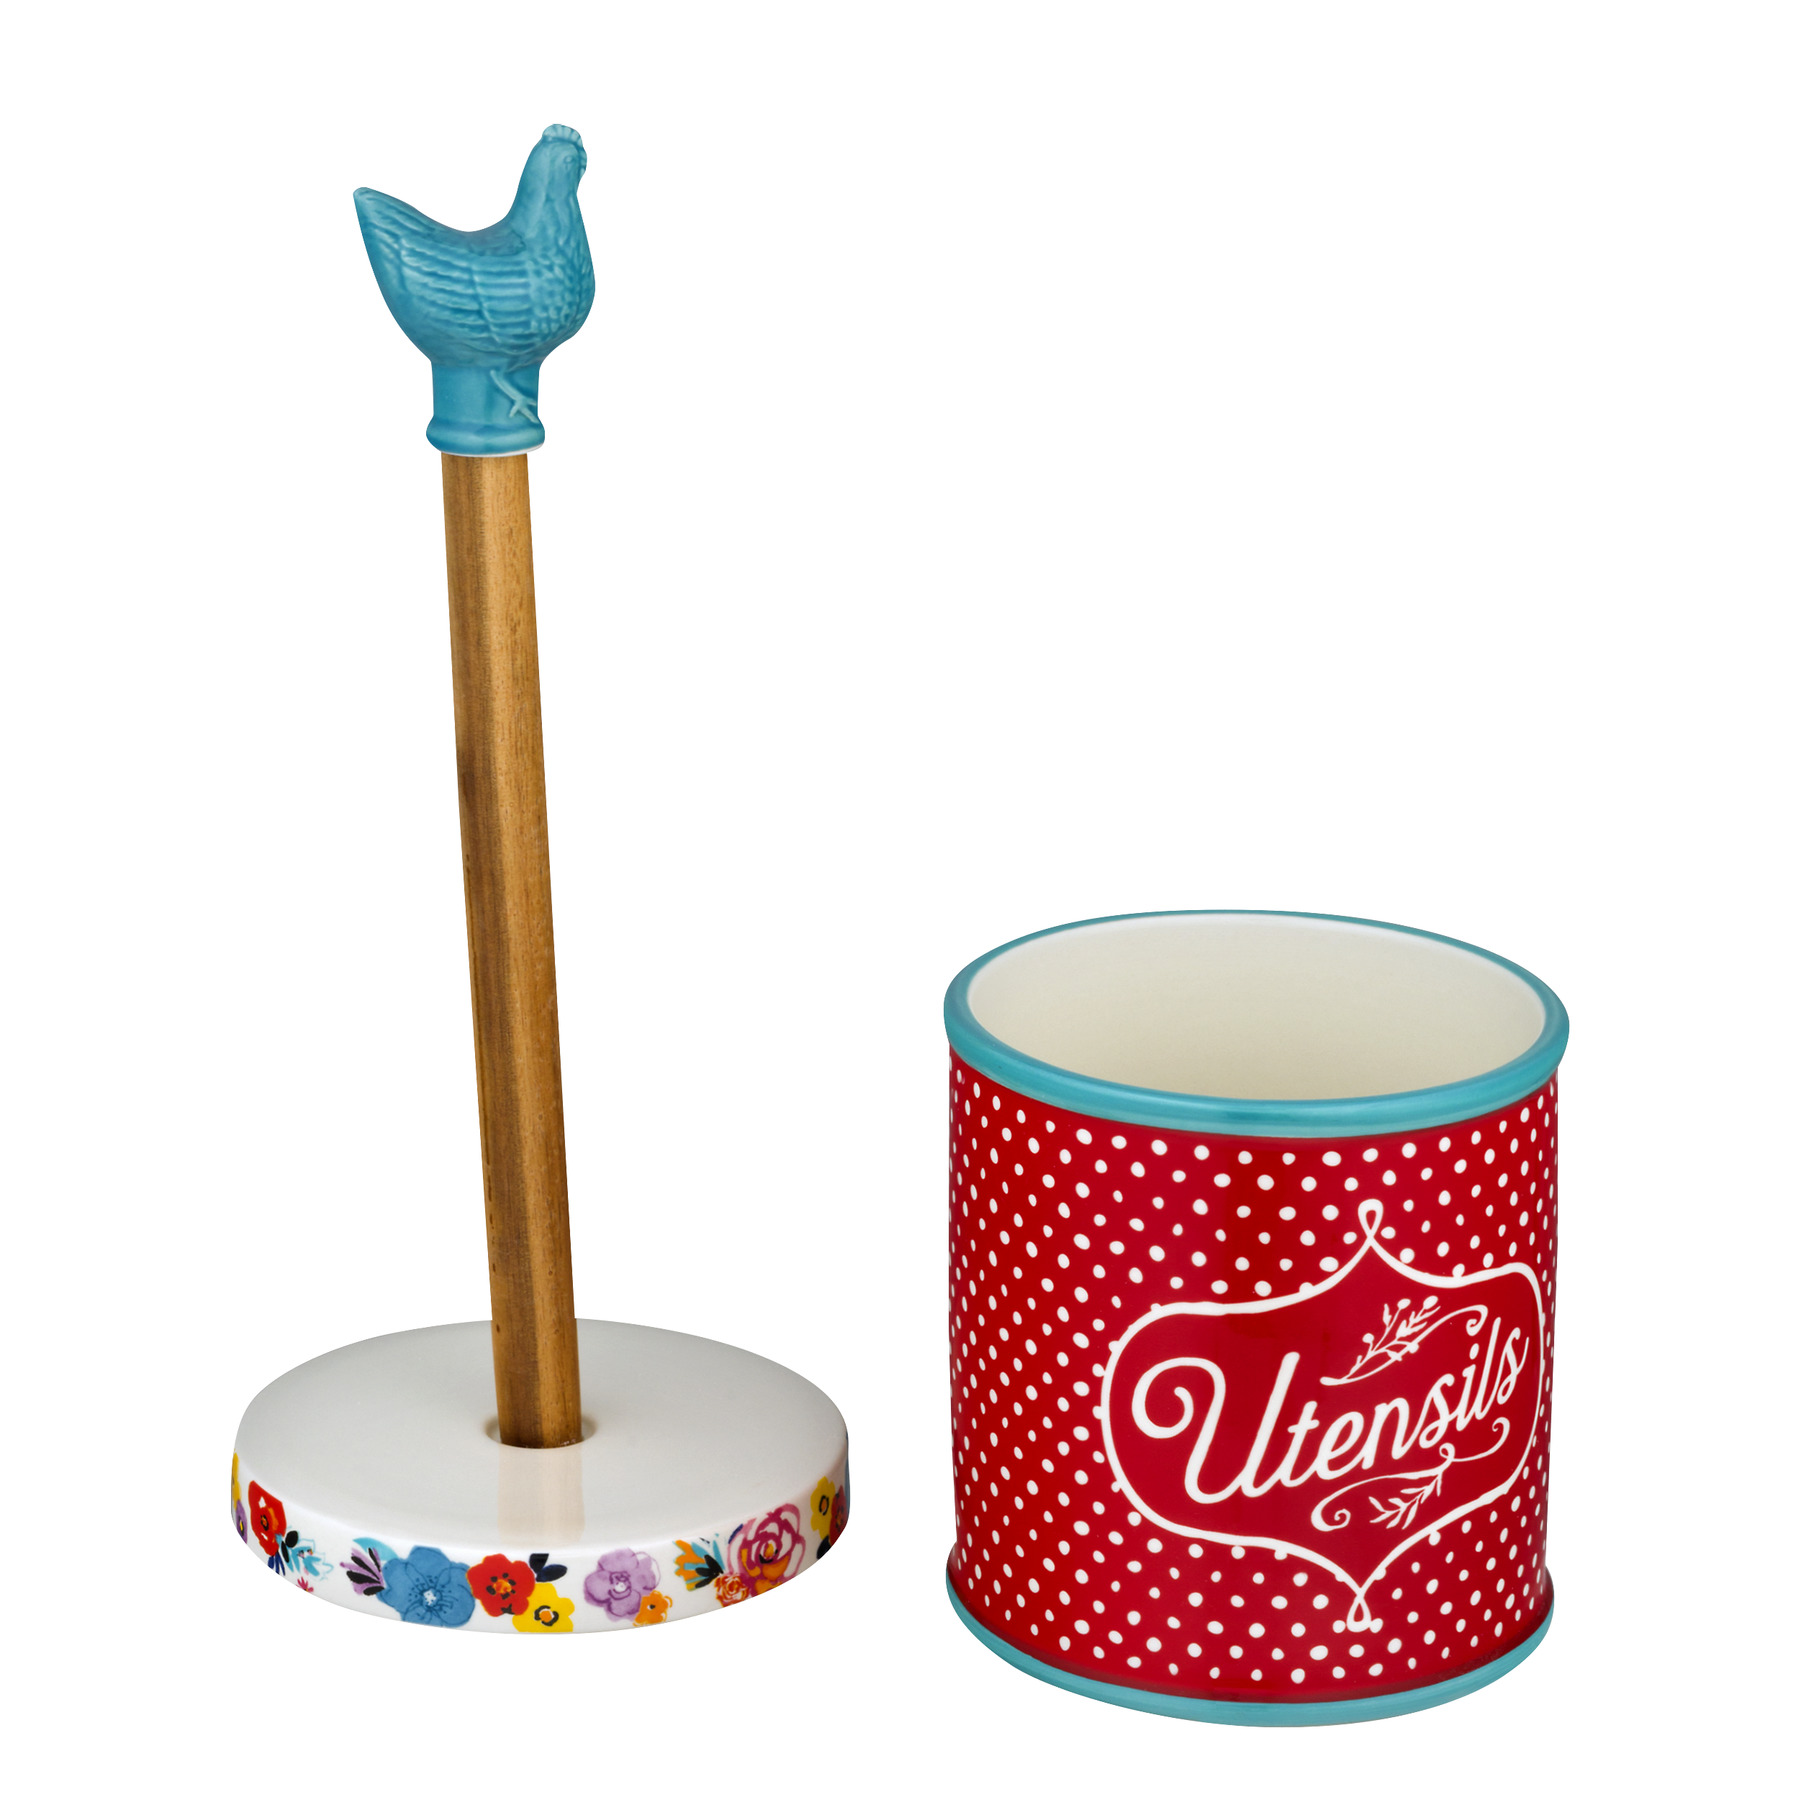 The Pioneer Woman Flea Market Paper Towel Holder and Utensil Crock, Turquoise - image 4 of 6